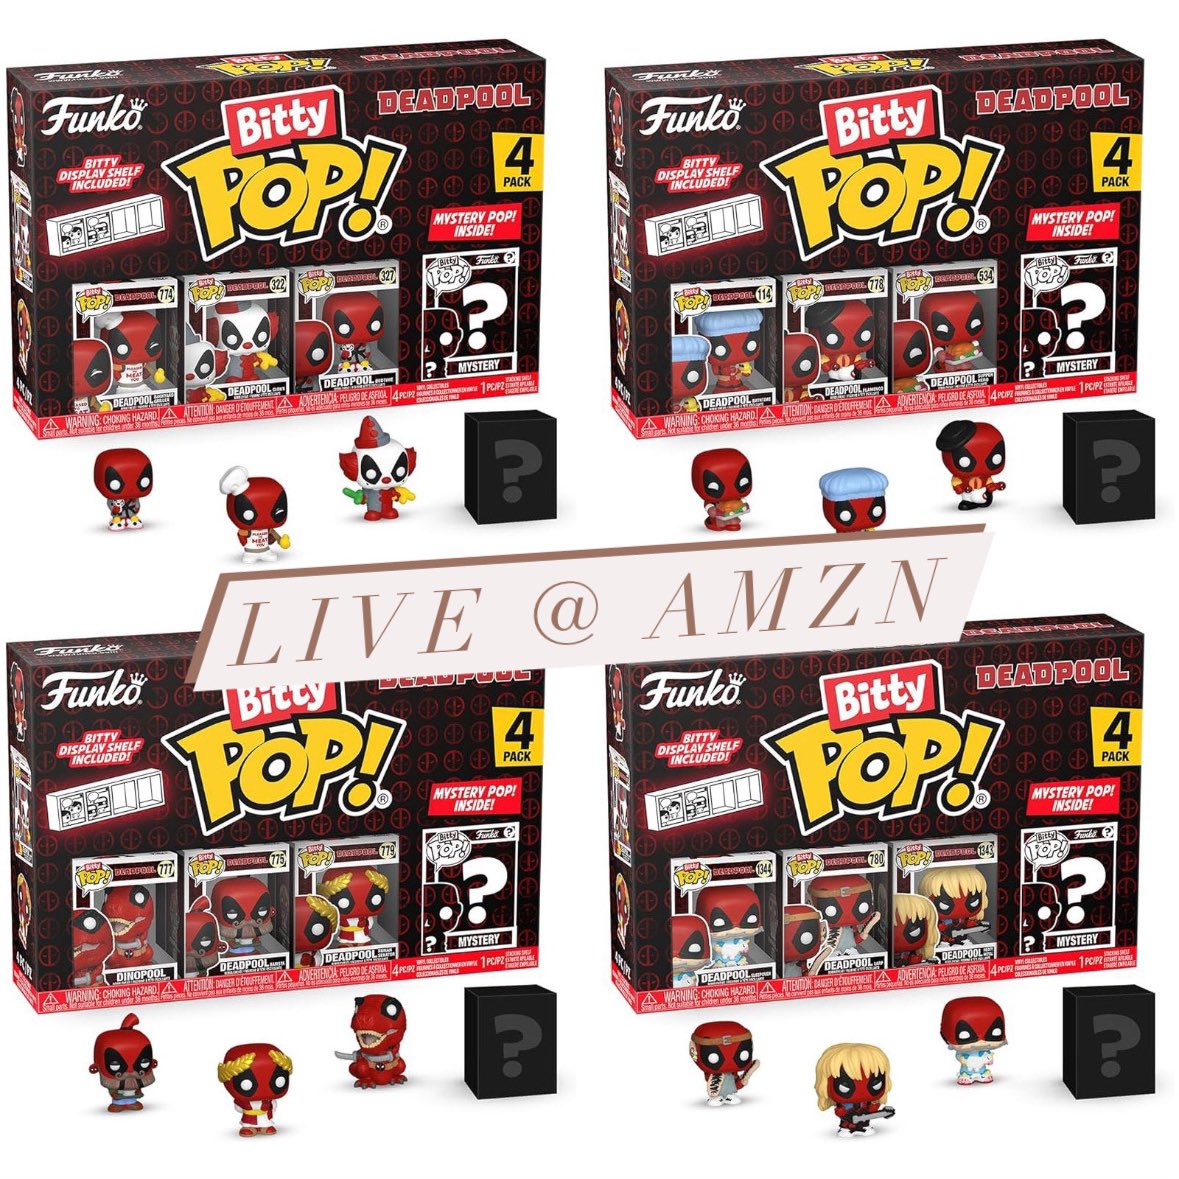 Now live! Deadpool fans grab the new Bitty POPs! At the link below ~ good luck on the chase!
Linky ~ amzn.to/3ykXLBd
#Ad #Deadpool #FPN #FunkoPOPNews #Funko #POP #POPVinyl #FunkoPOP #FunkoSoda